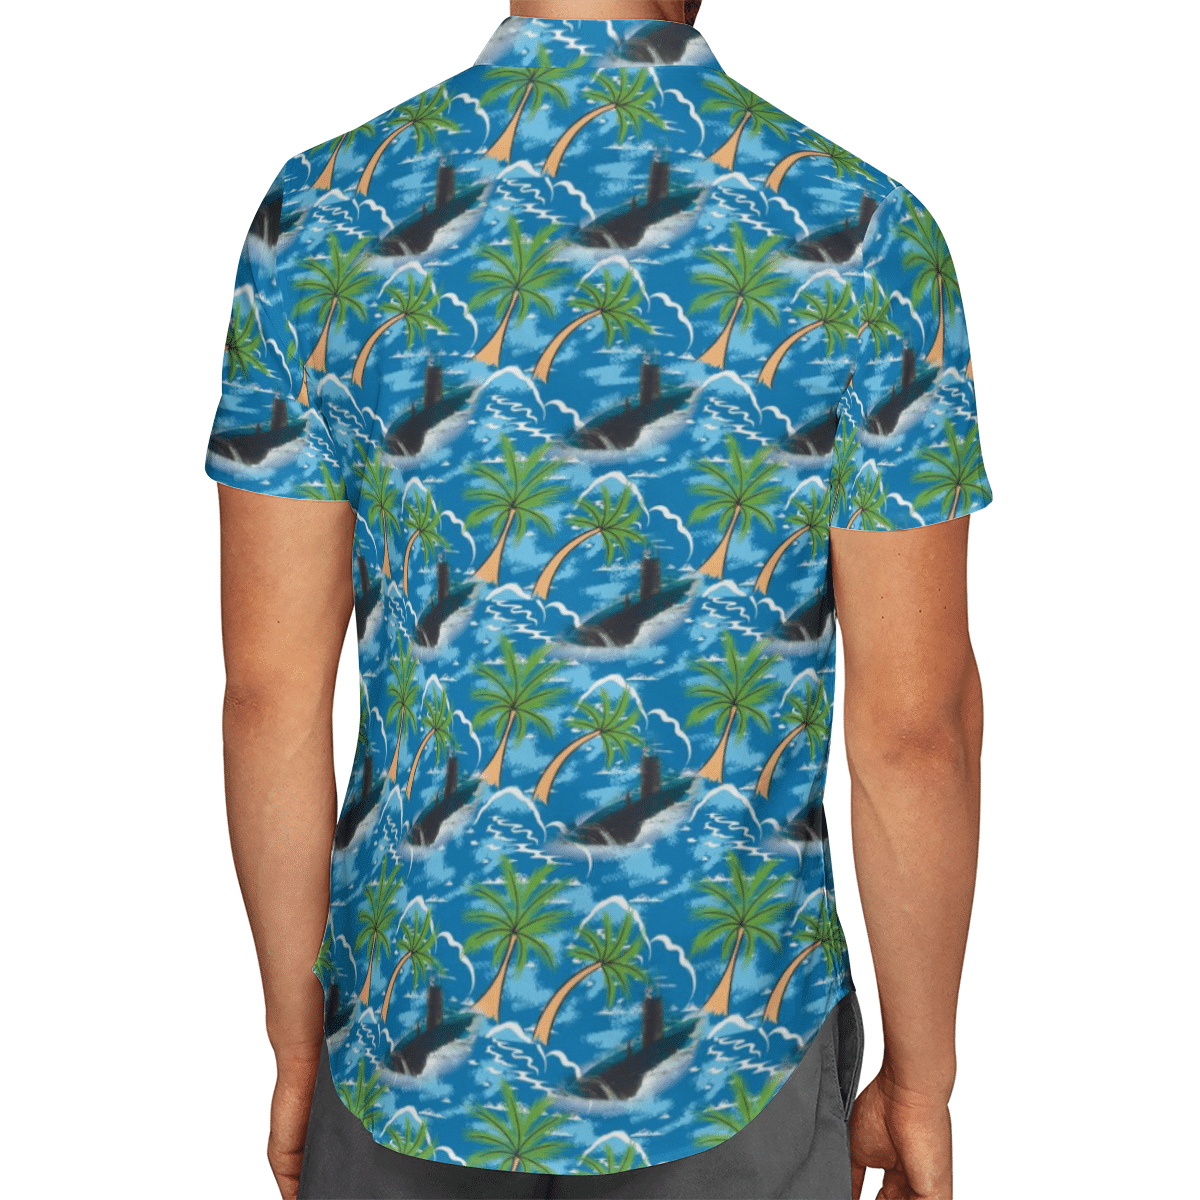 Going to the beach with a quality shirt 209